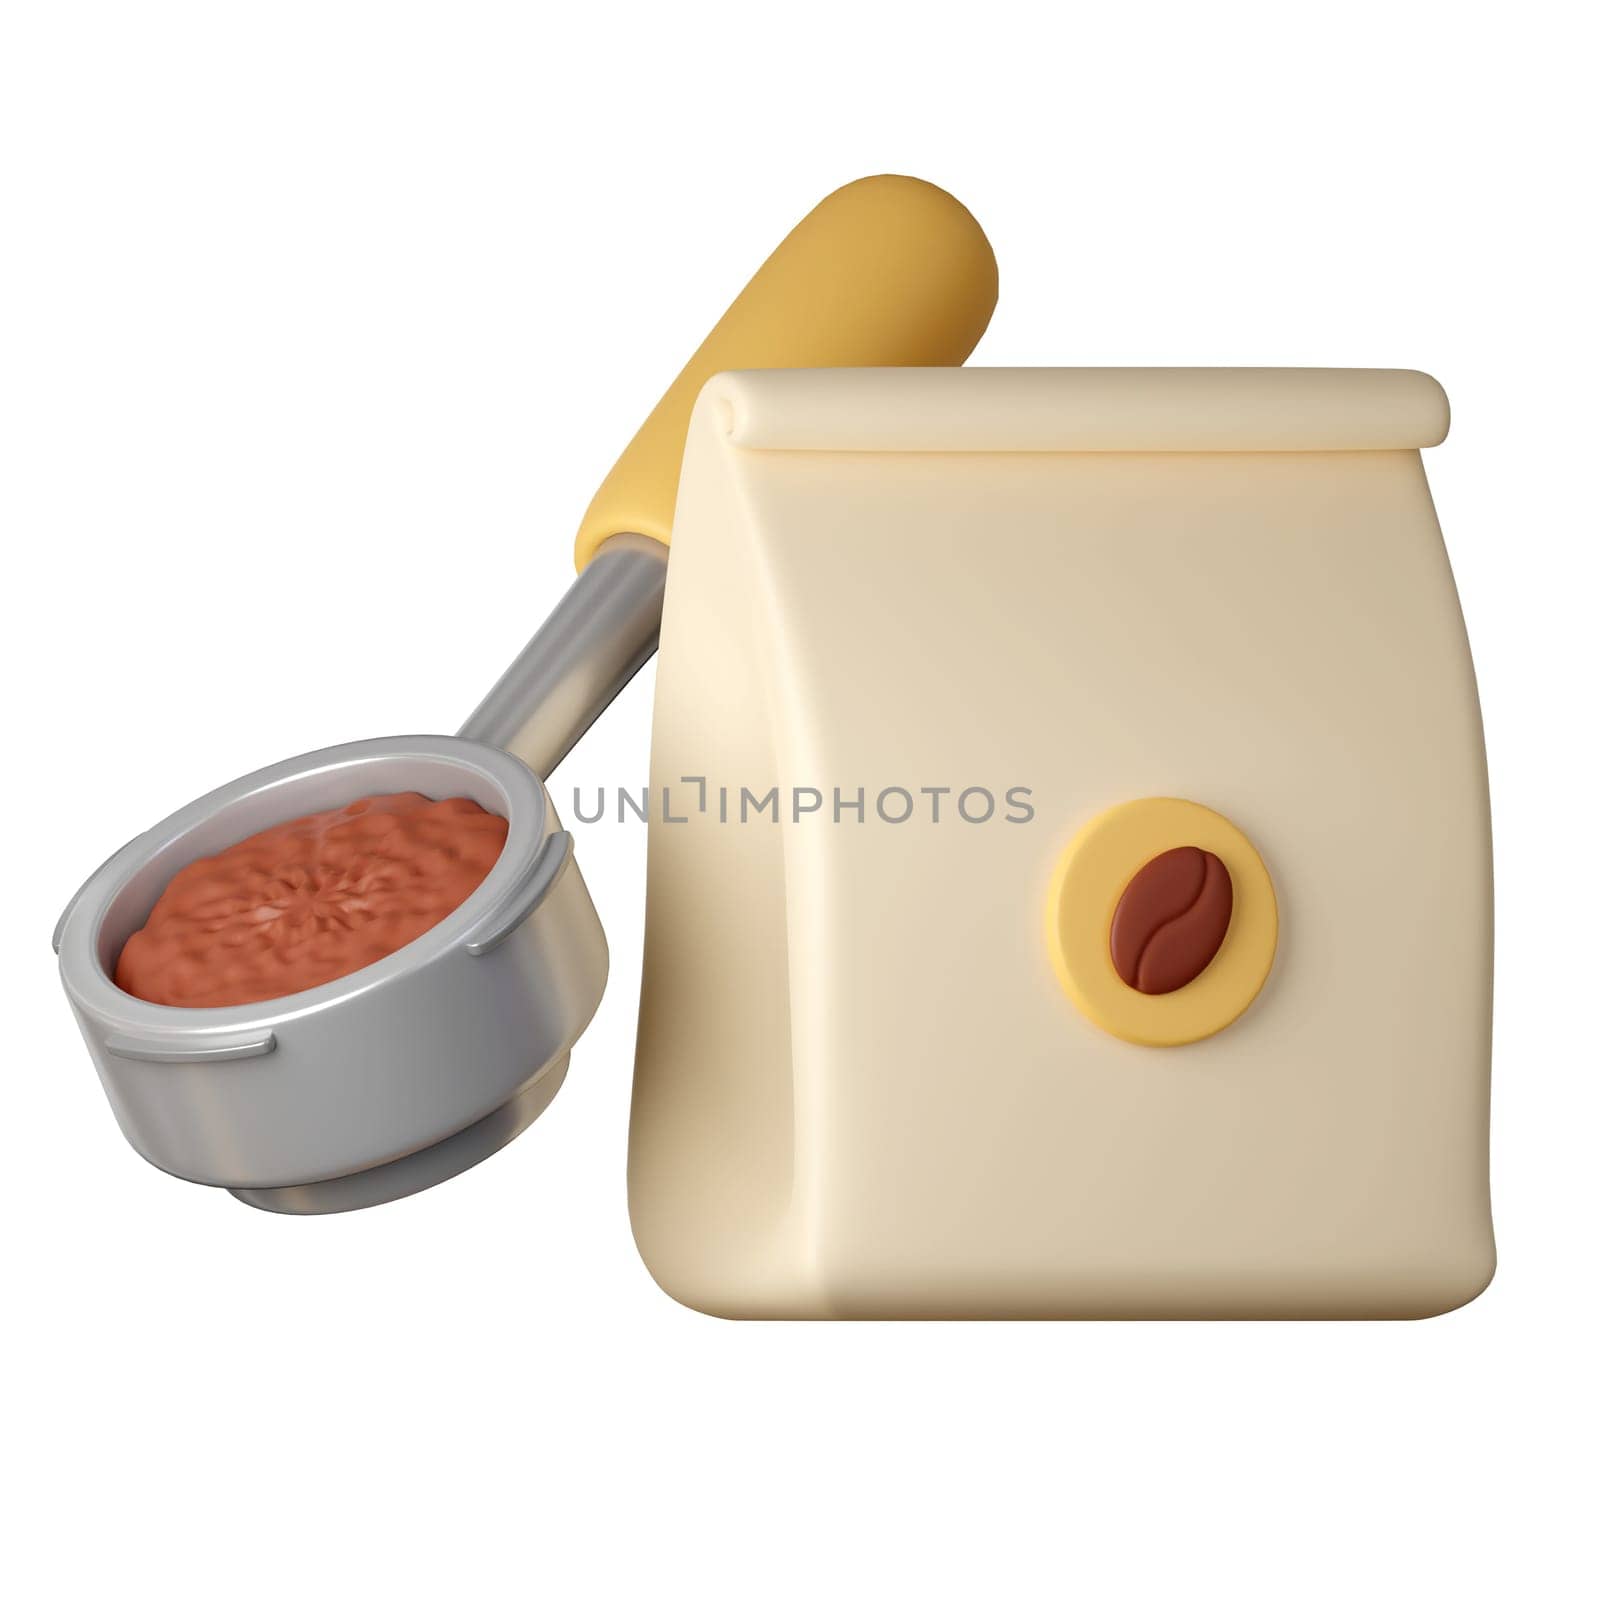 A ground coffee and coffee bag Cartoon Style Isolated on a White Background. 3d illustration.